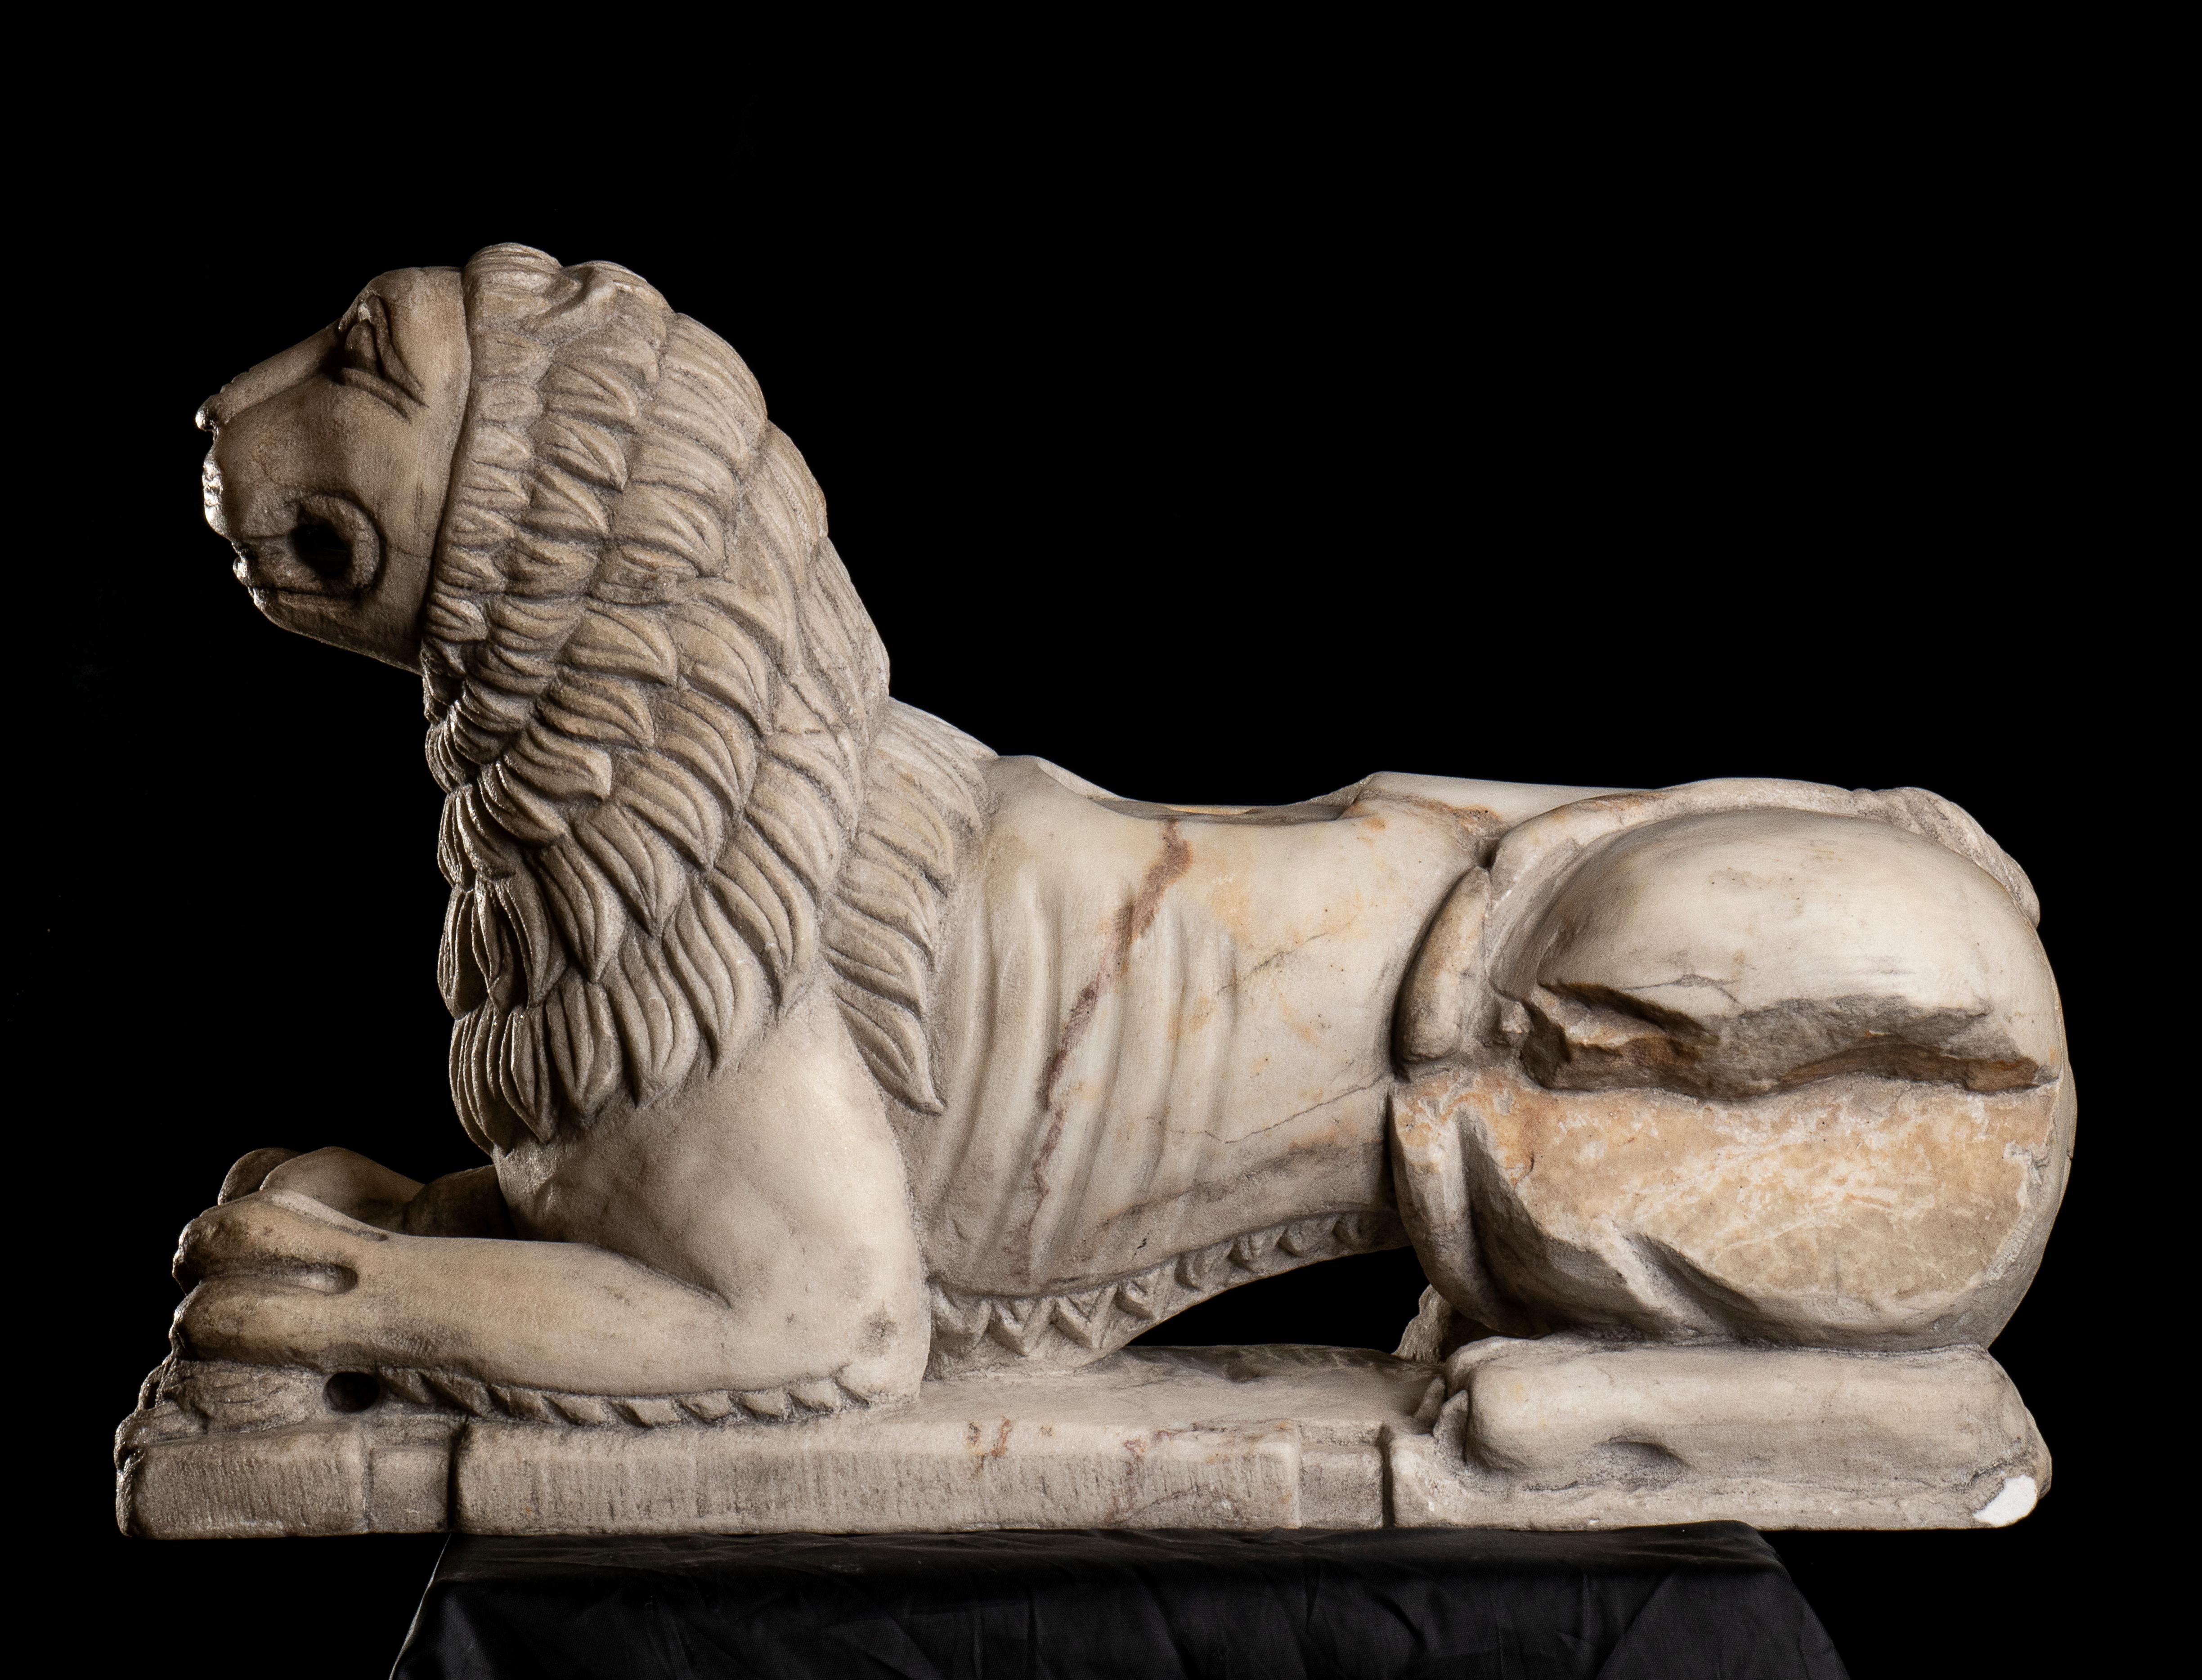 the Stylophore Lions were figurative sculpture used by the medieval era to support pedestals at the entrance of the Cathedral; stylophore is an architectural term deriving from the Greek and which means 